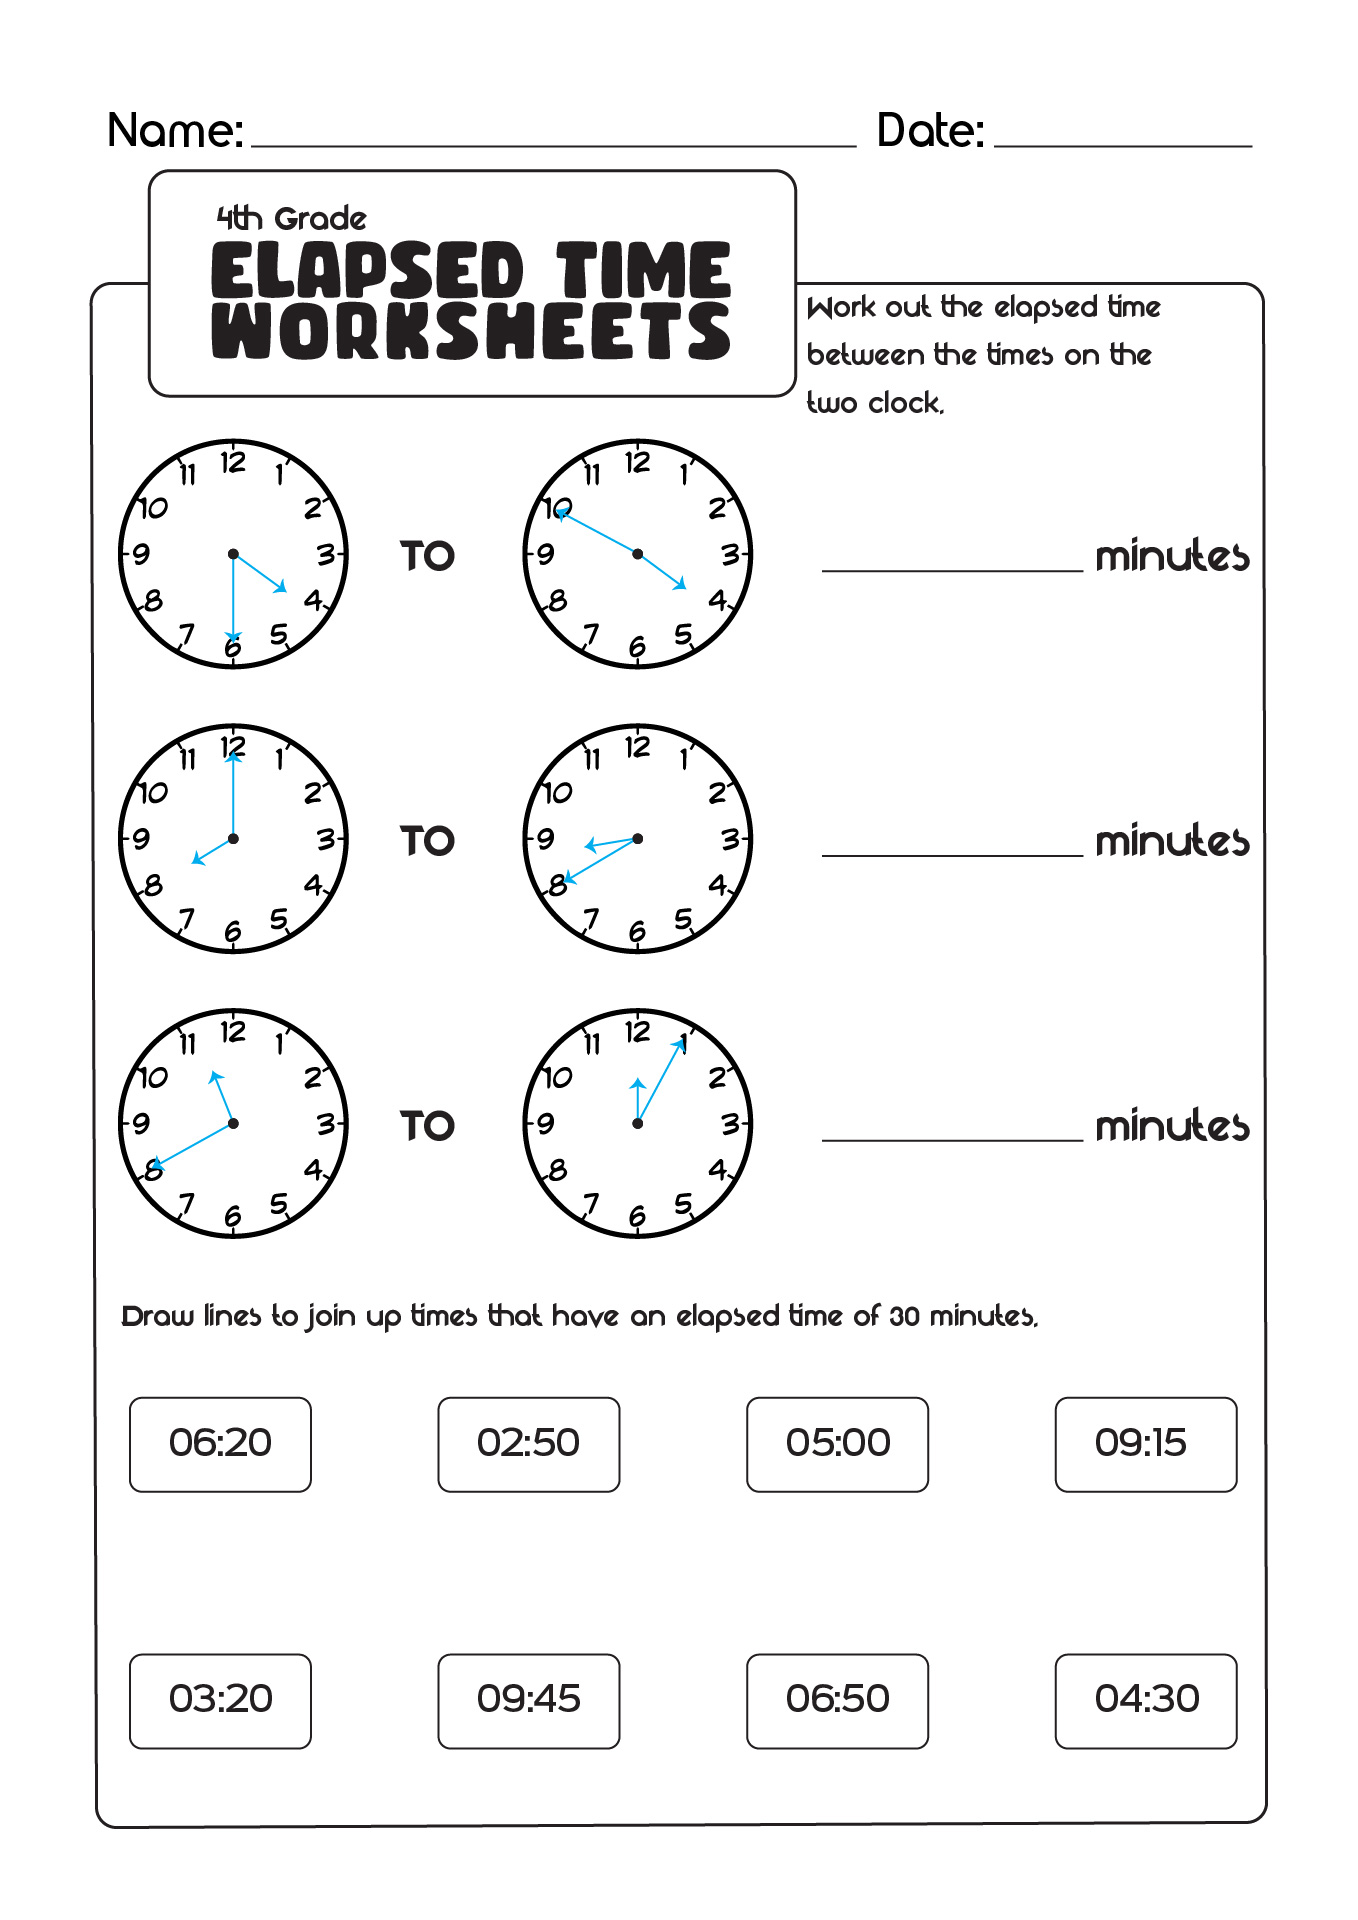 4th Grade Elapsed Time Worksheets Image